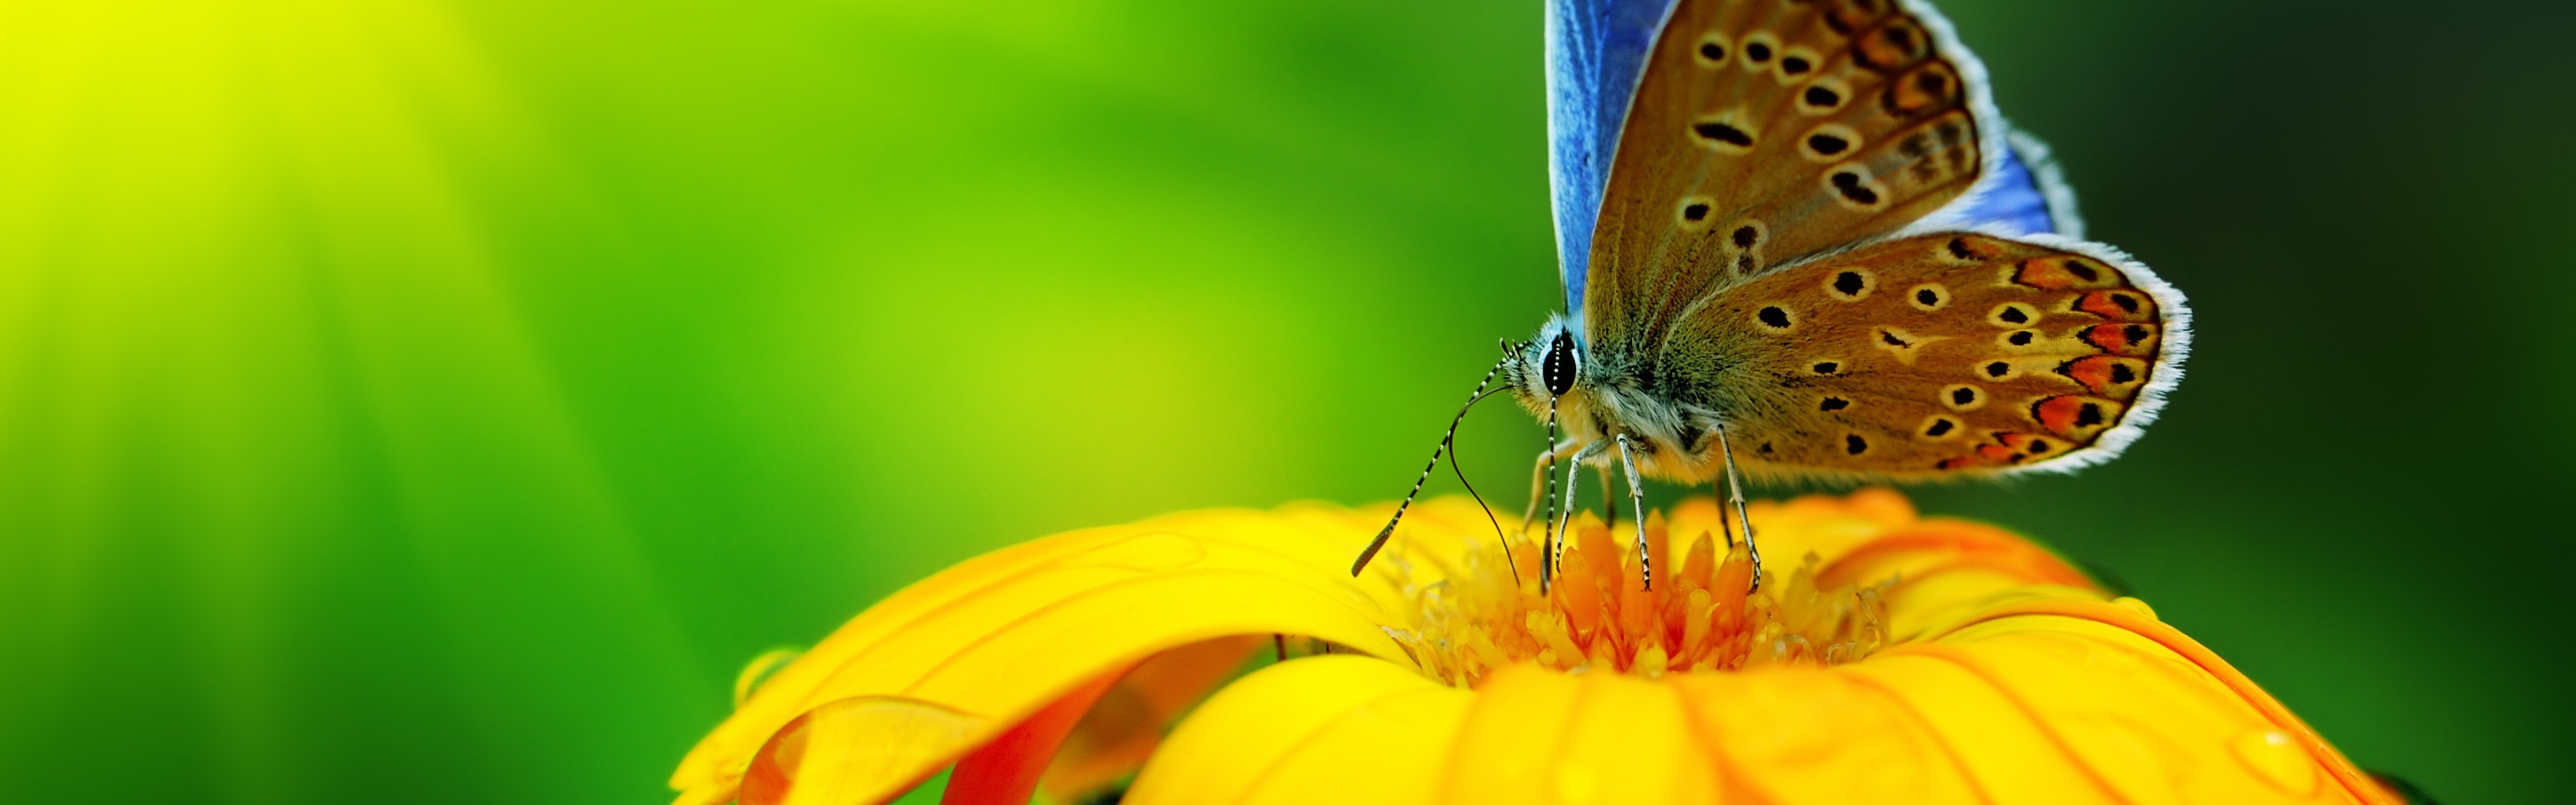 multiple Display, Flowers, Yellow Flowers, Butterfly, Insect Wallpaper